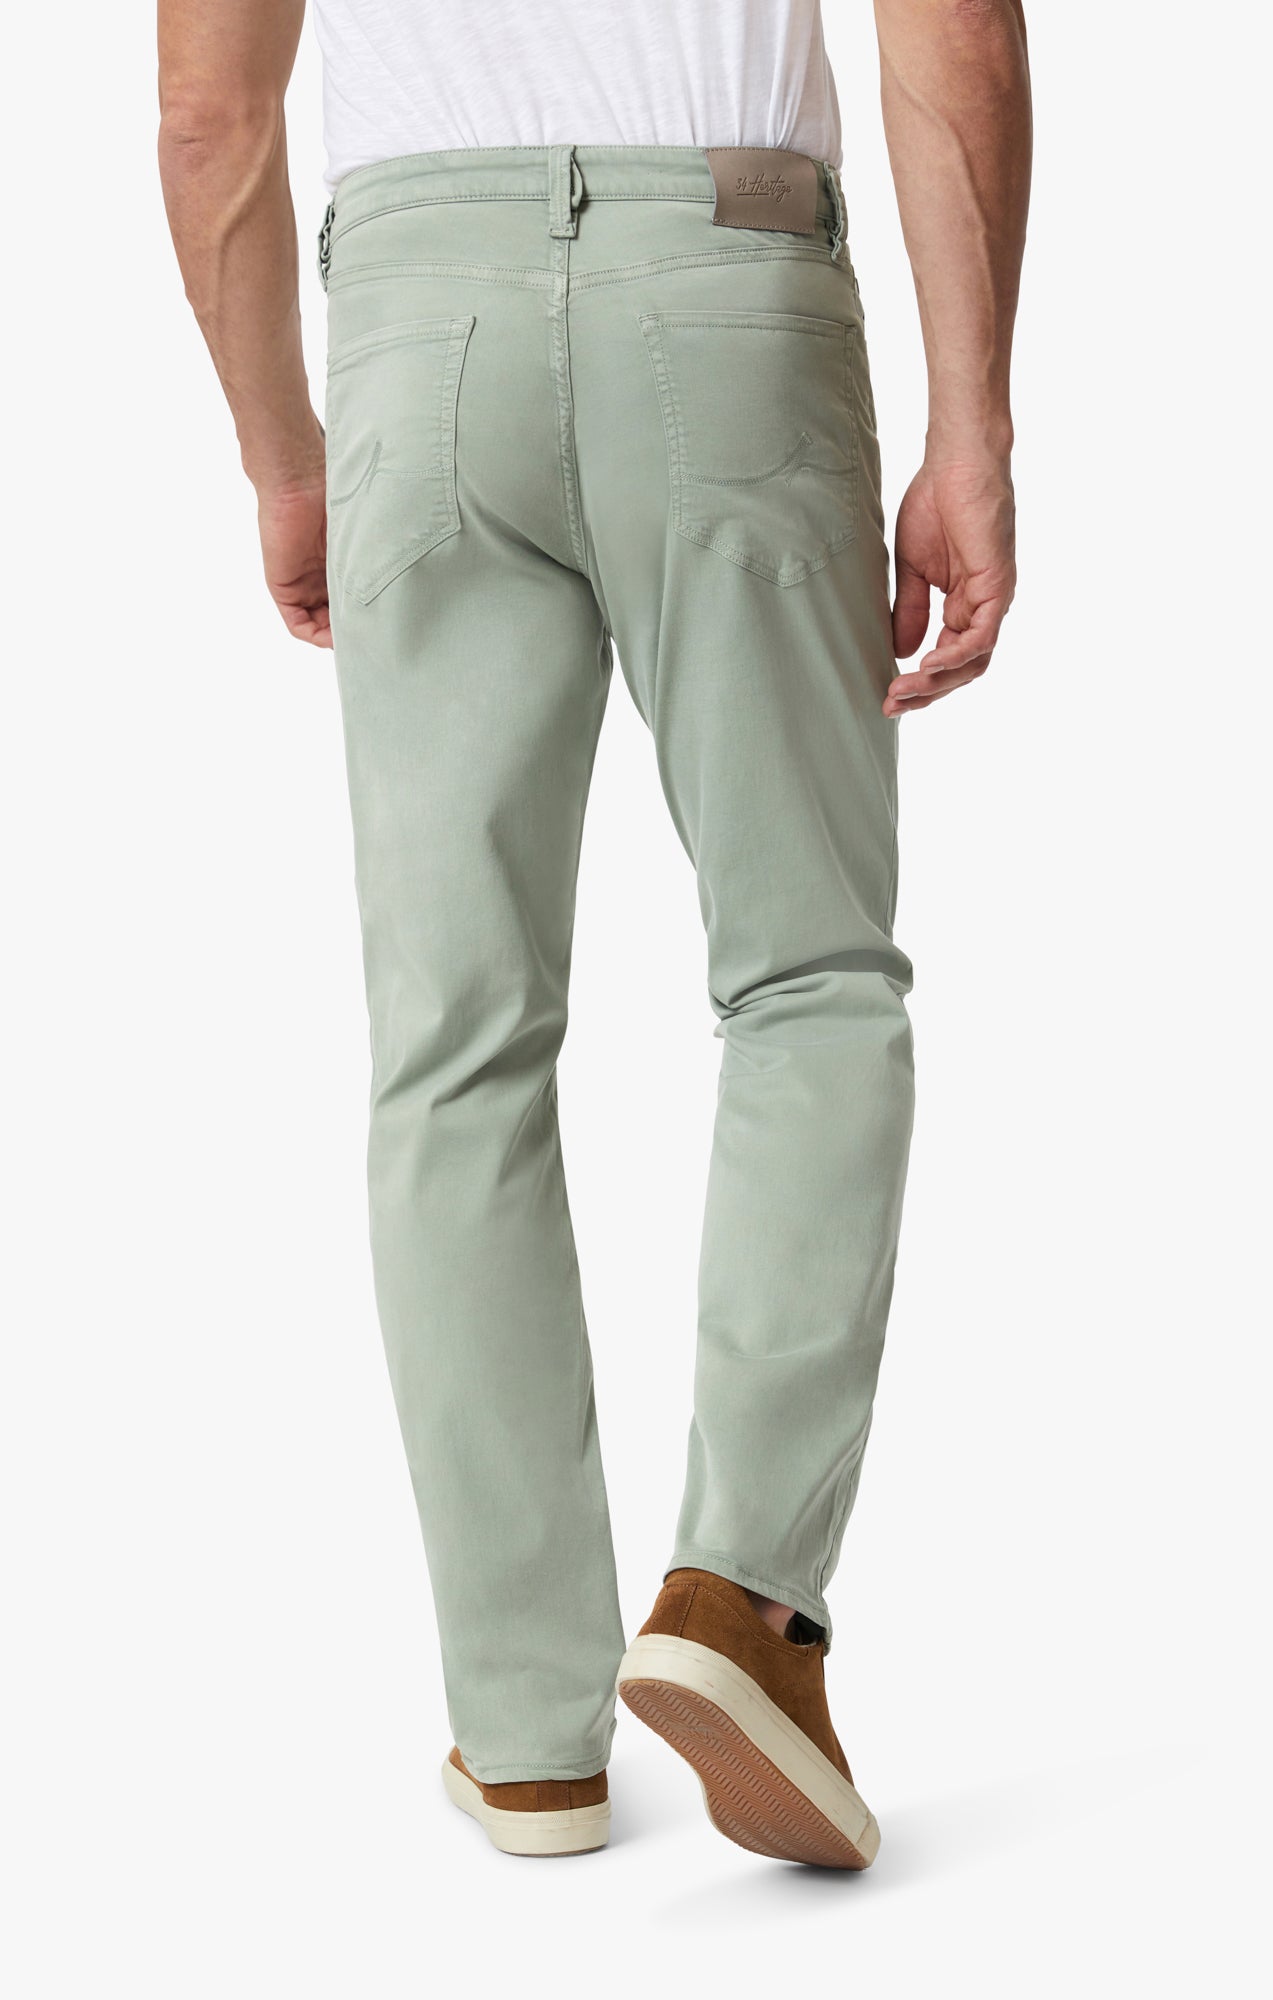 Charisma Relaxed Straight Leg Pants In Iceberg Green Twill